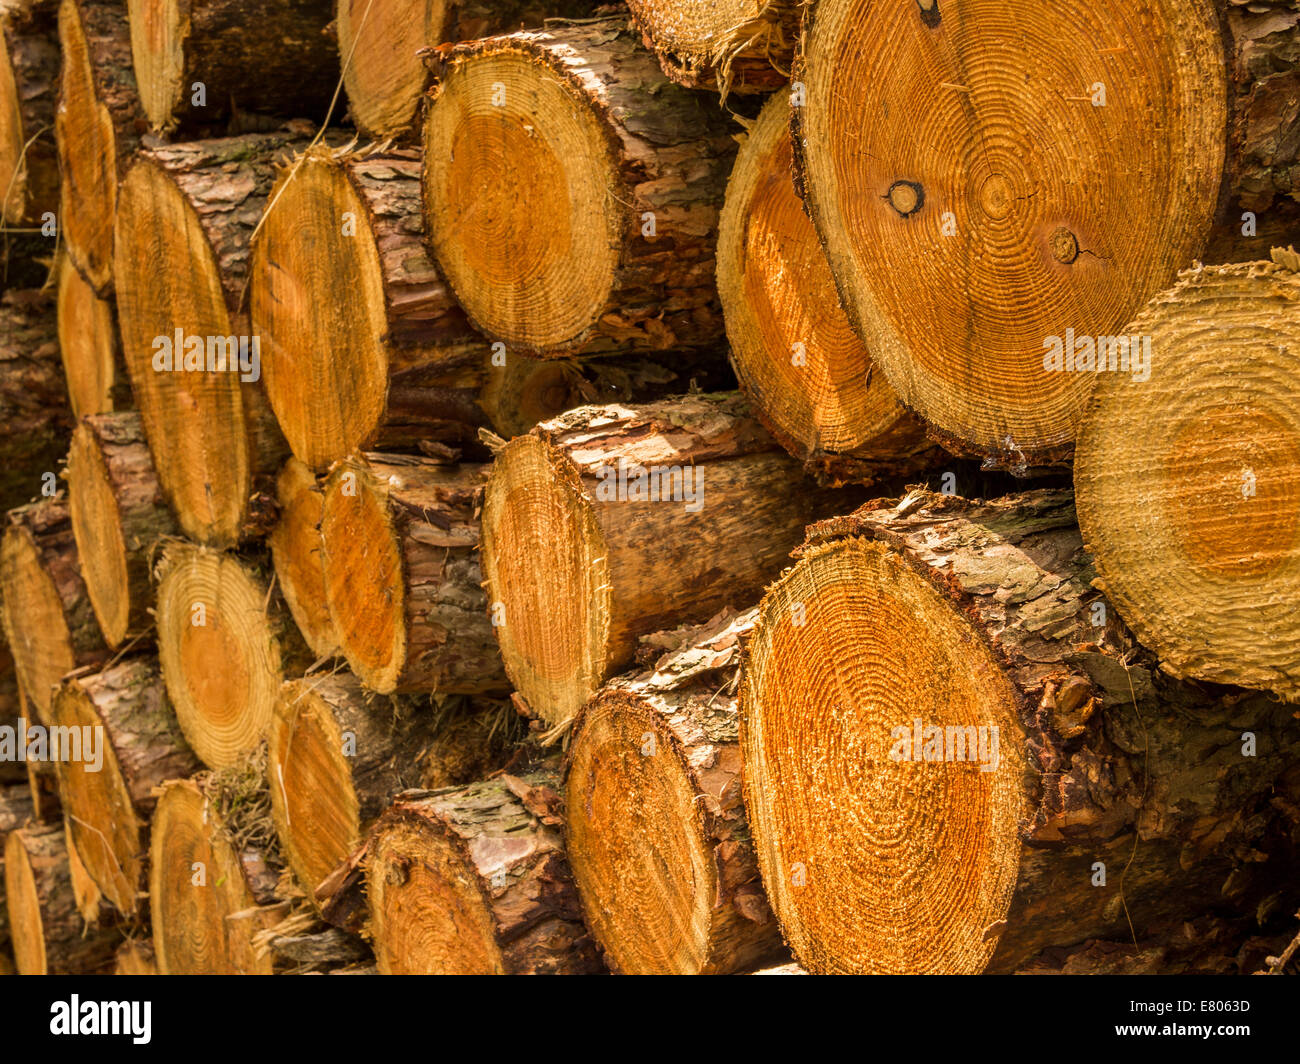 side view of a pile of cut down tree trunks Stock Photo